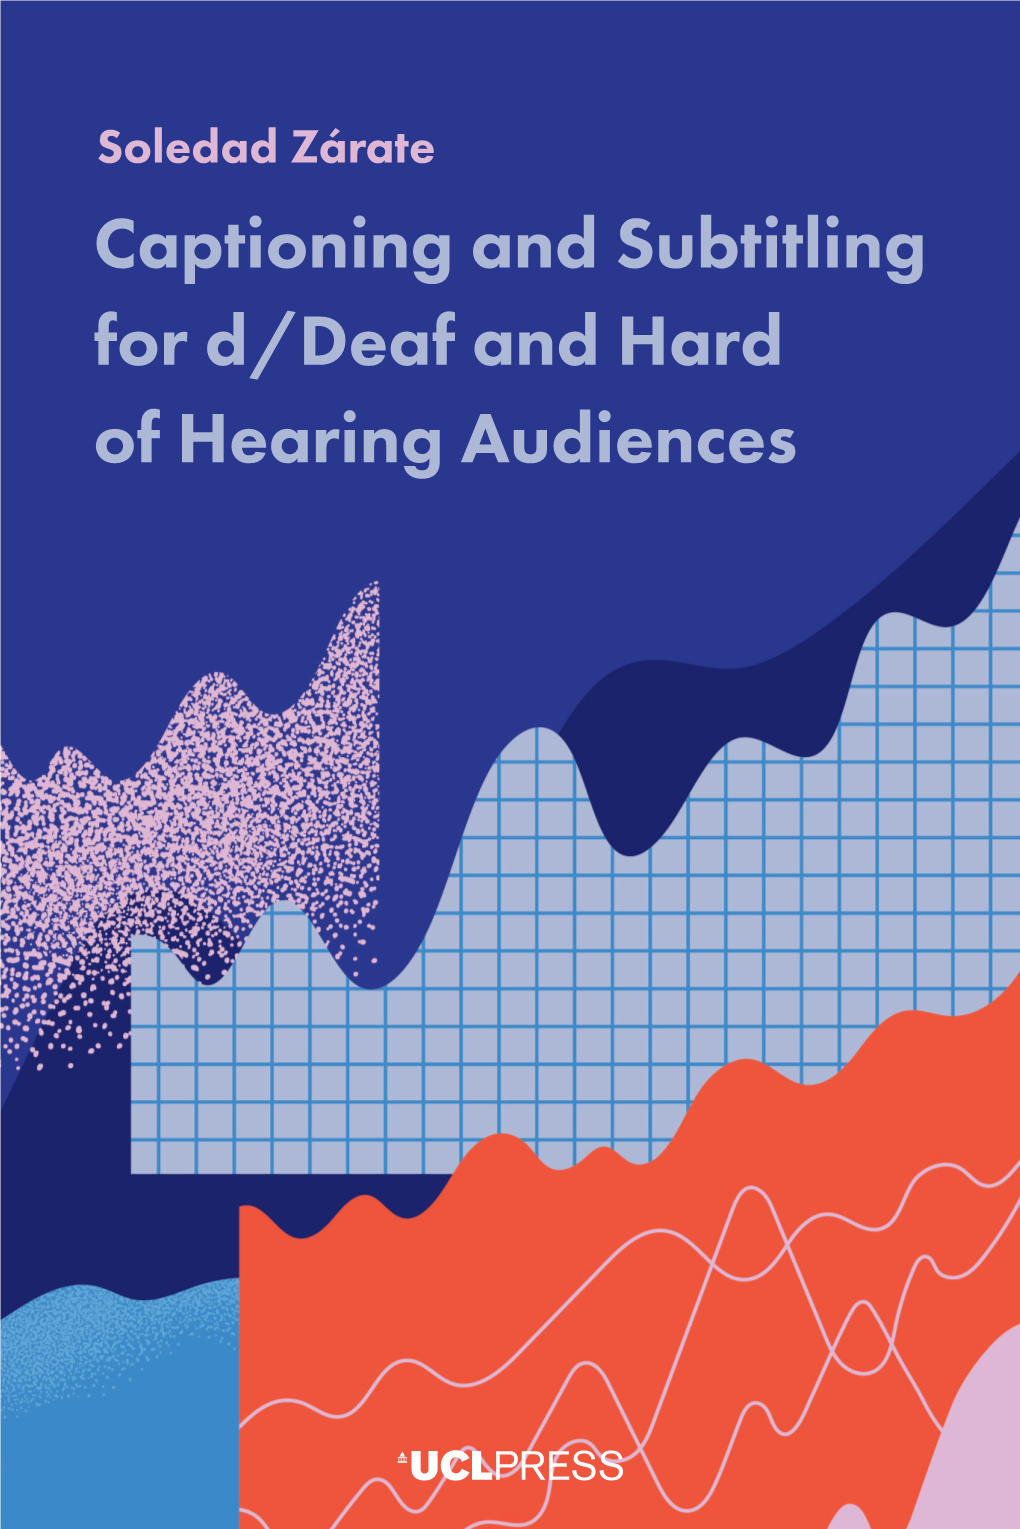 Captioning and Subtitling for D/Deaf and Hard of Hearing Audiences Captioning and Subtitling for D/Deaf and Hard of Hearing Audiences